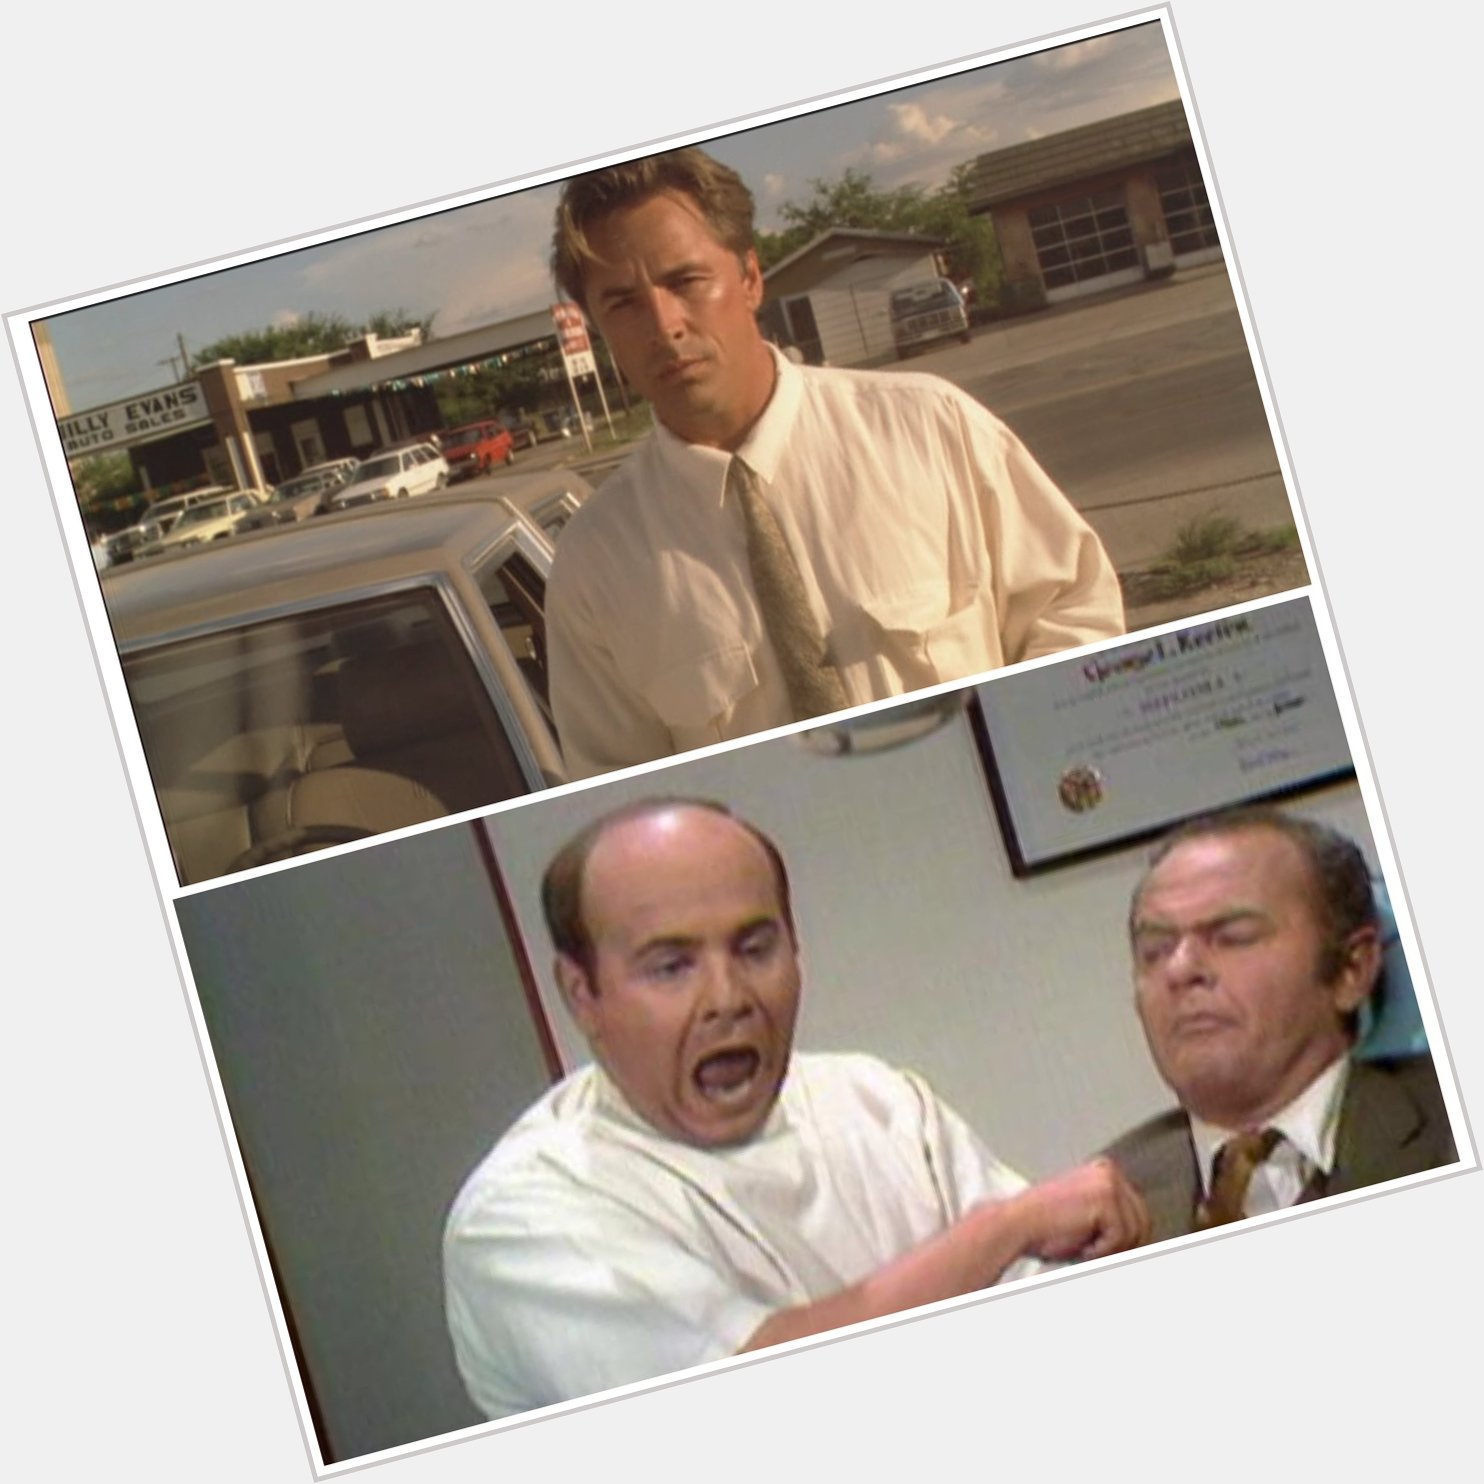 Happy Birthday to 

Don Johnson 
The late great Tim Conway 